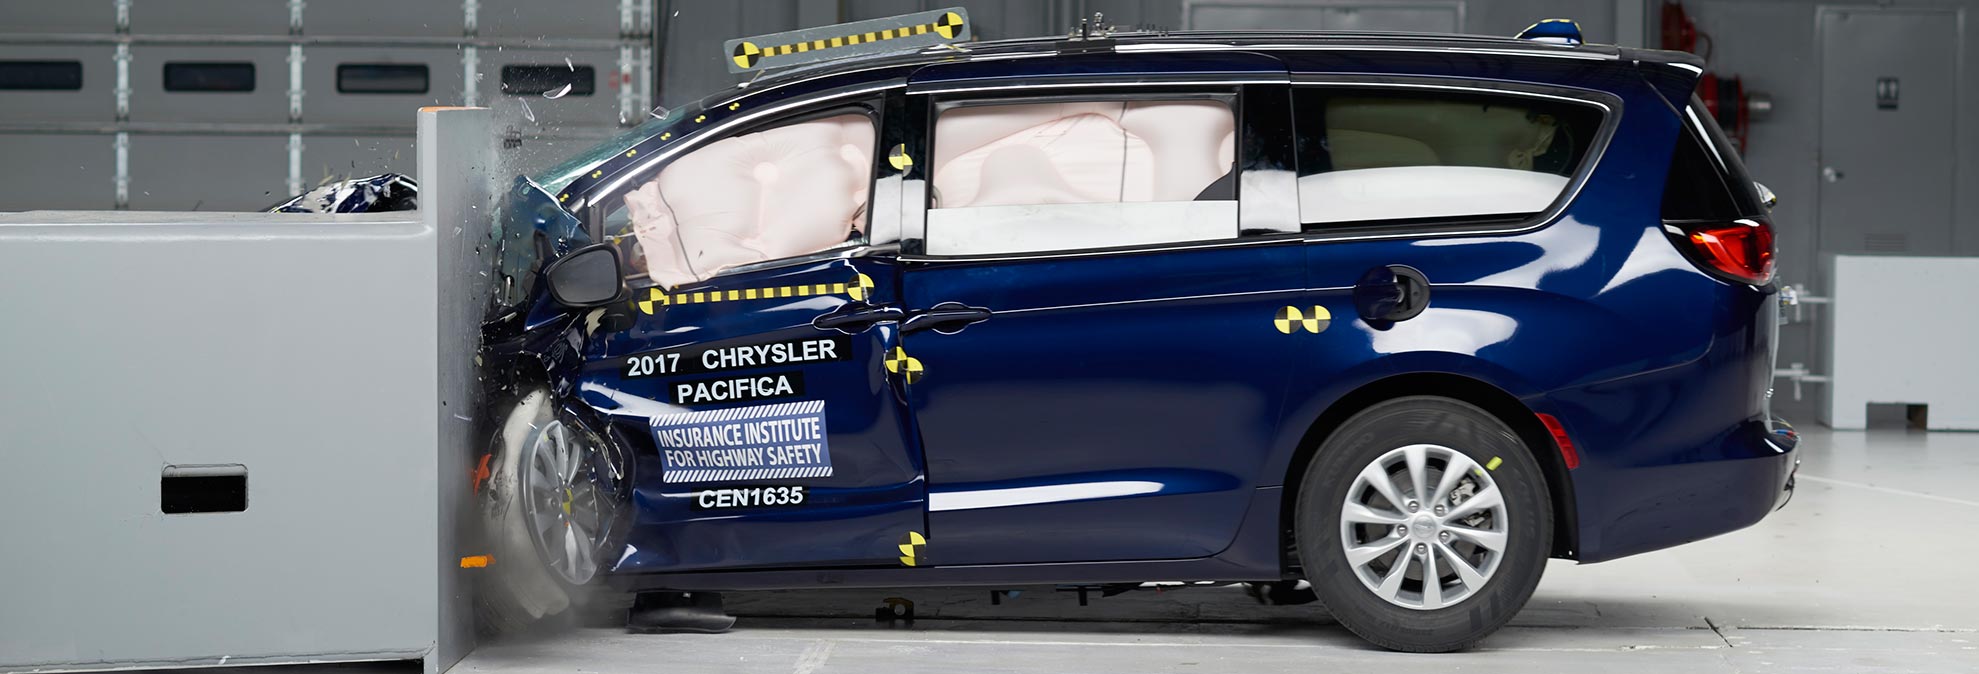 IIHS Names Safest Cars Consumer Reports